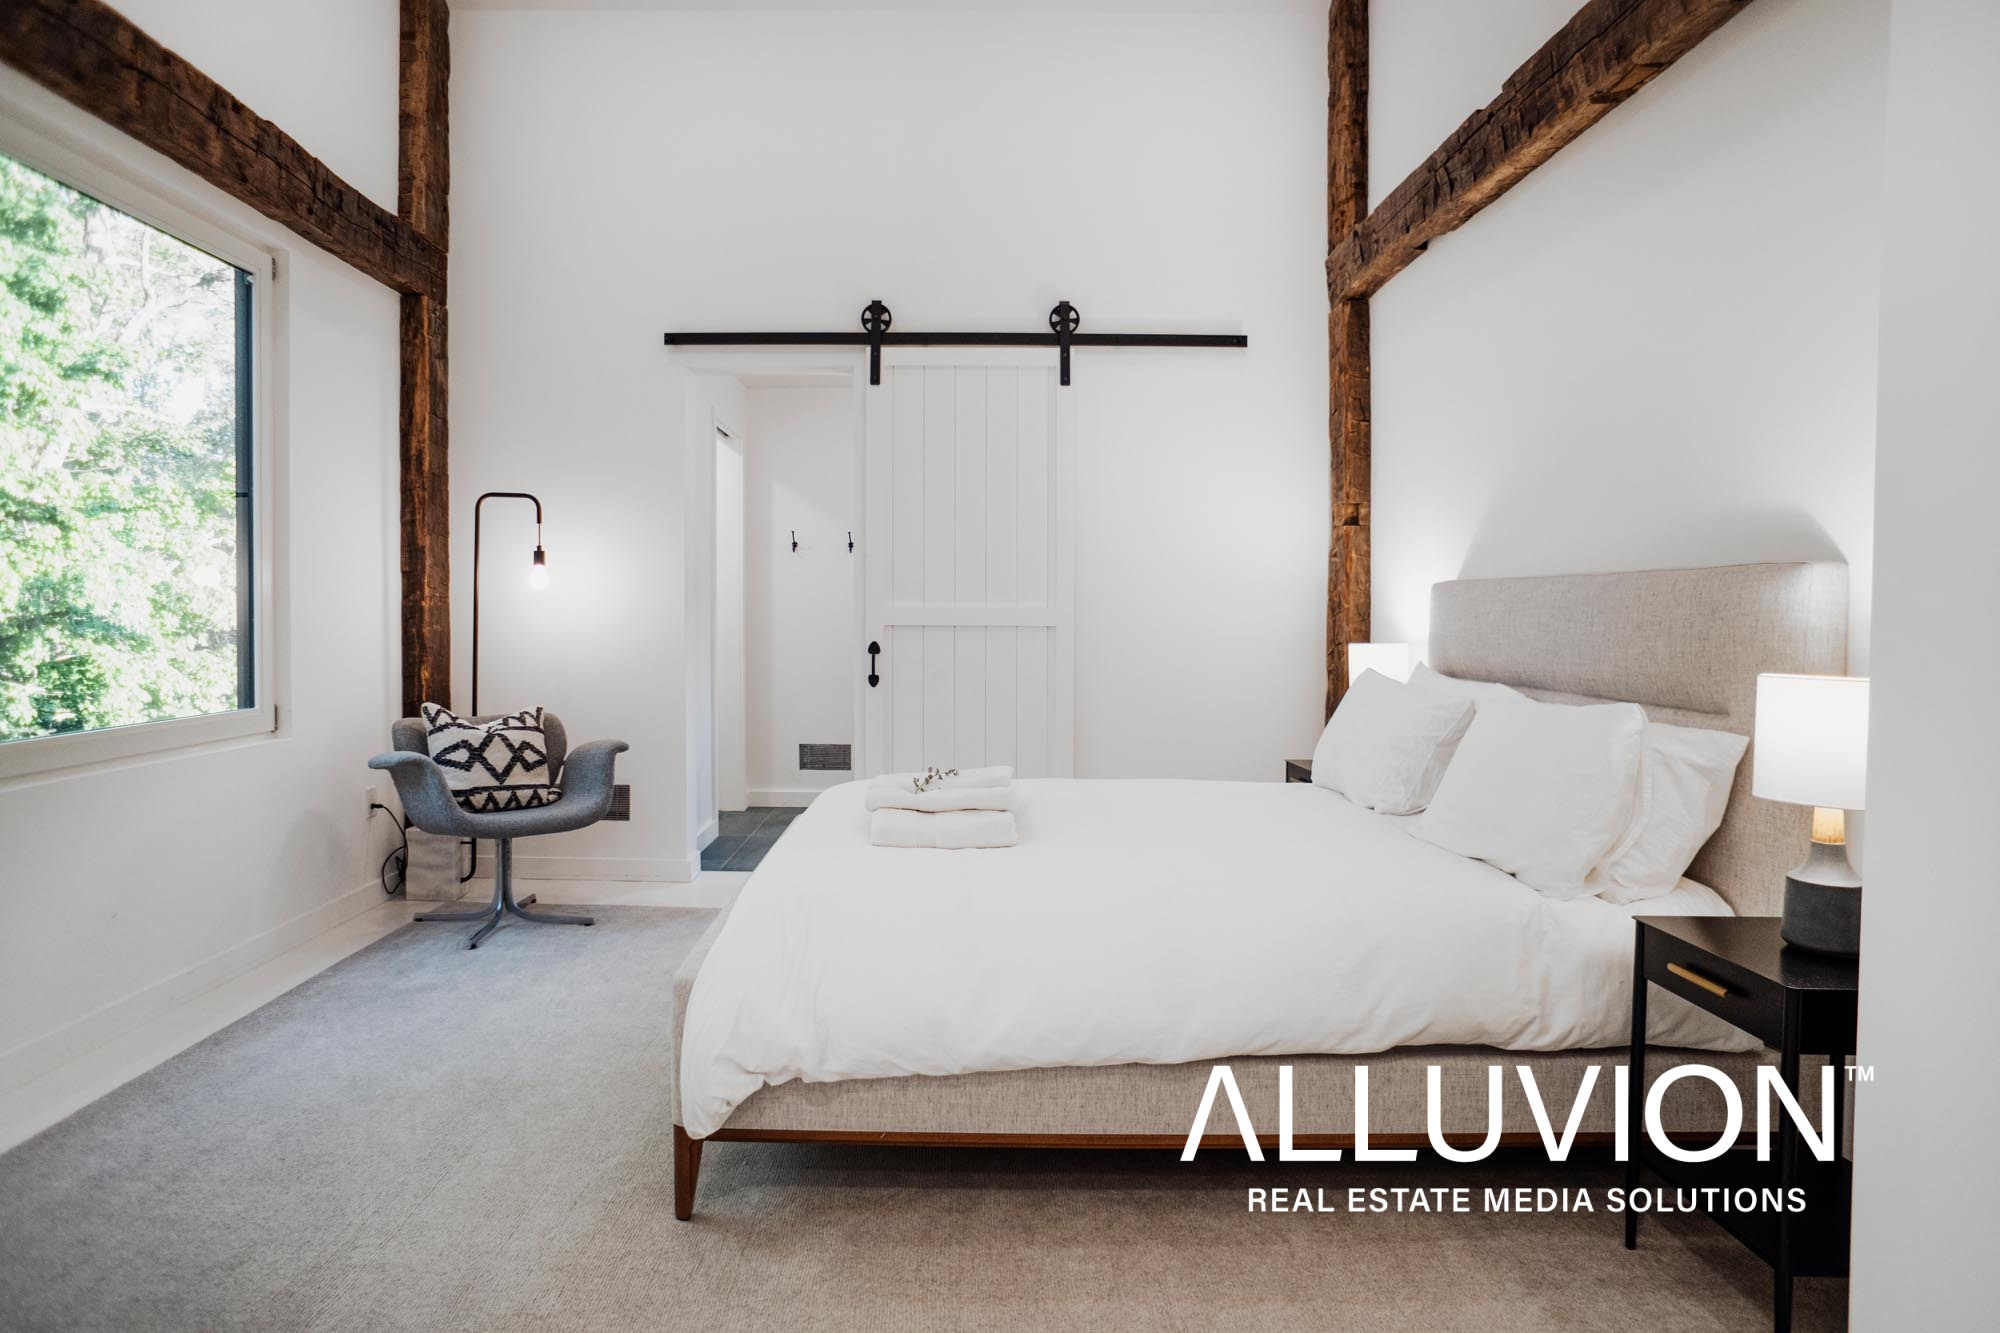 Airbnb Review of a Converted Barn Overlooking Apsley Hill Farm – Hudson Valley Airbnb Reviews with Photographer Maxwell Alexander – Top Airbnb Listings in the Hudson Valley and Catskills